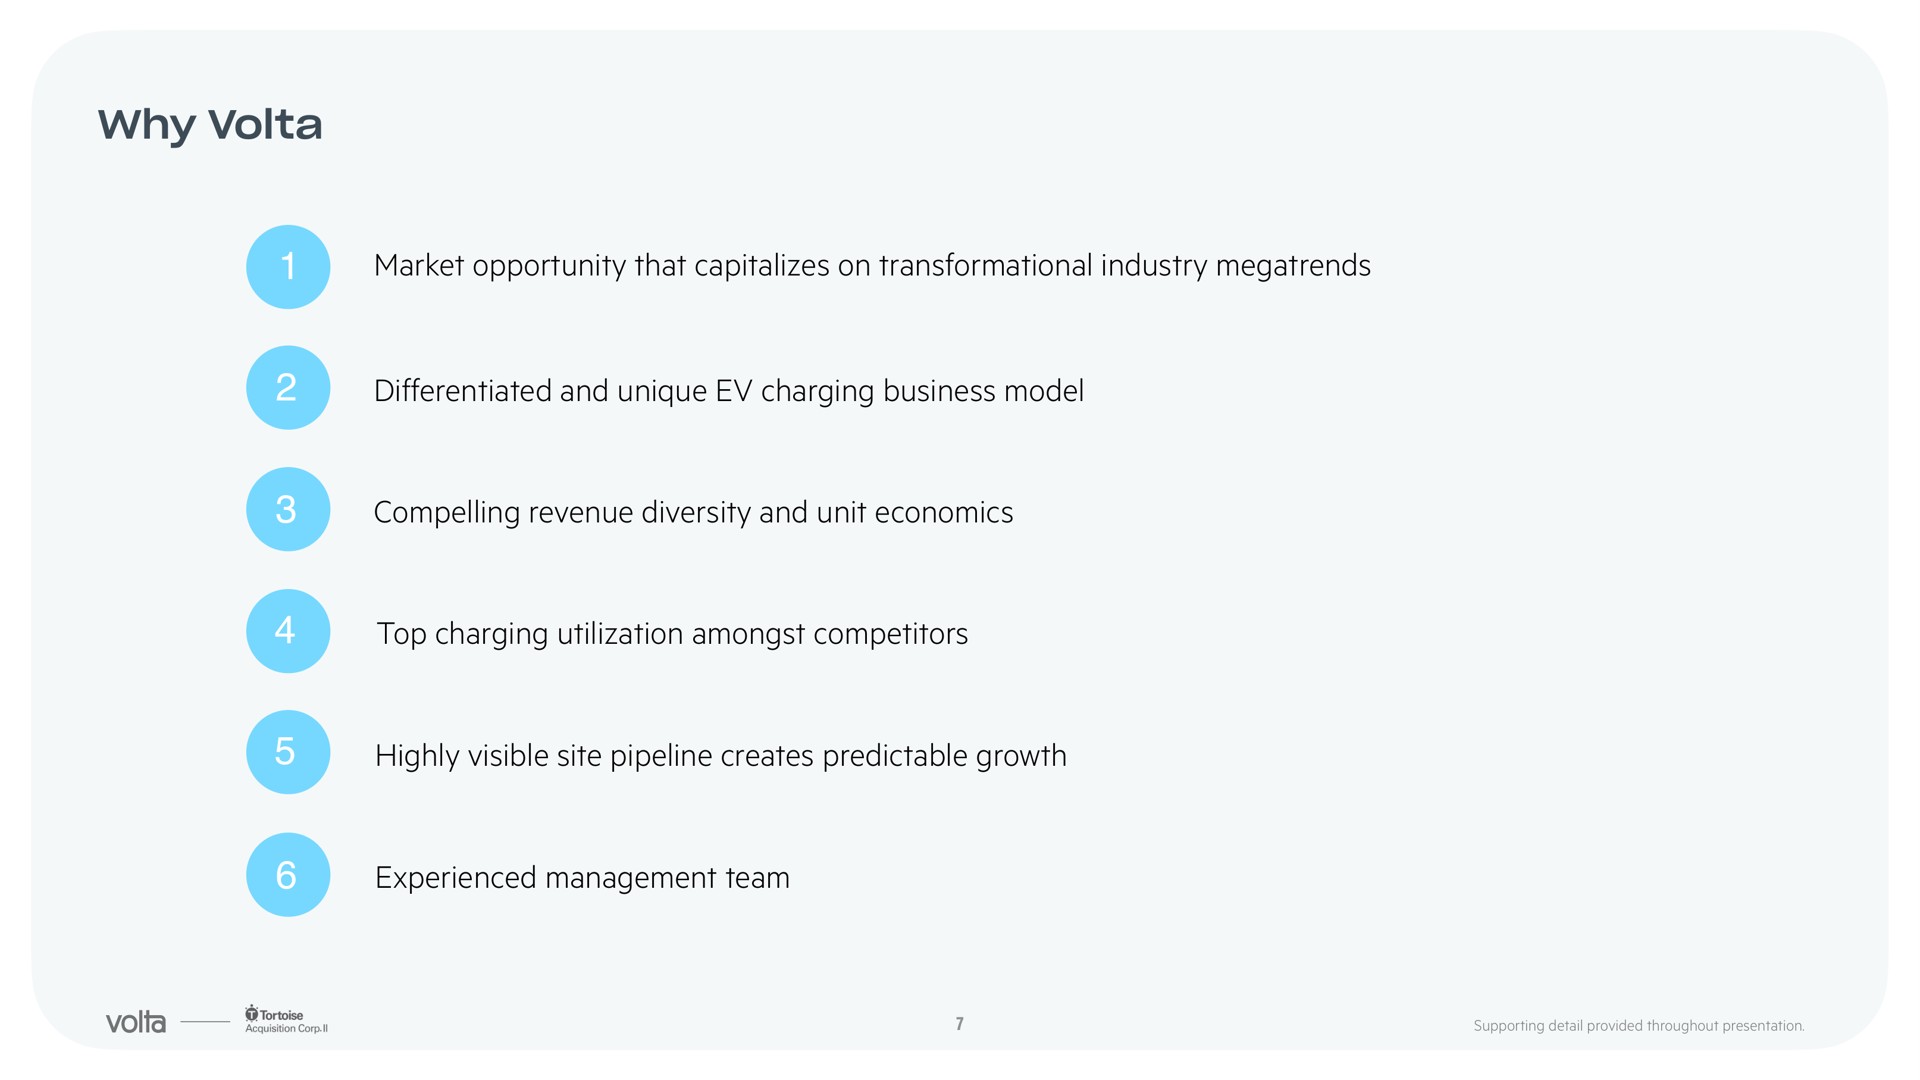 why market opportunity that capitalizes on industry differentiated and unique charging business model compelling revenue diversity and unit economics top charging utilization amongst competitors highly visible site pipeline creates predictable growth experienced management team | Volta